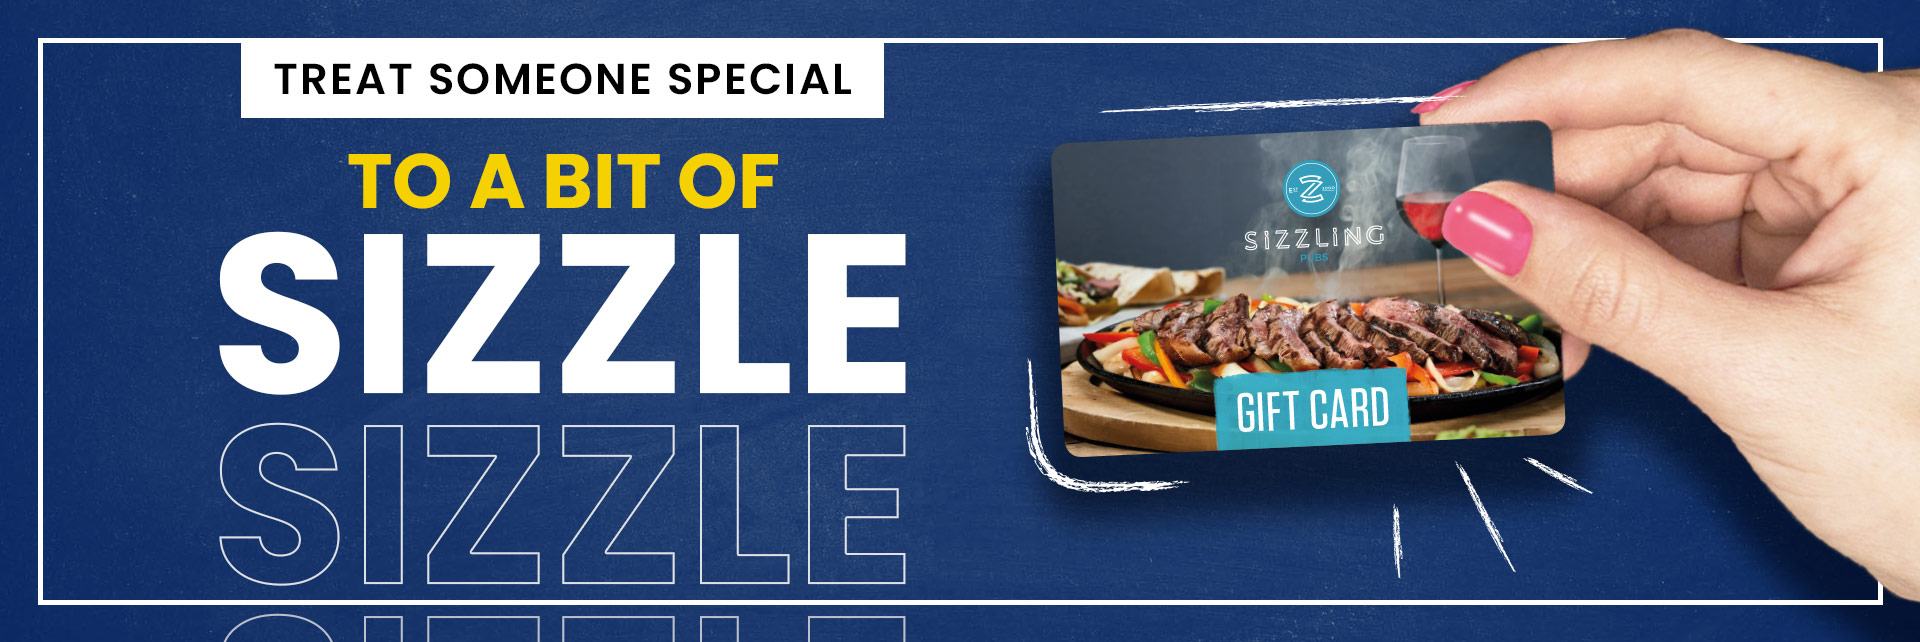 Sizzling Pubs Gift Card at The Nine Giants in Cardiff